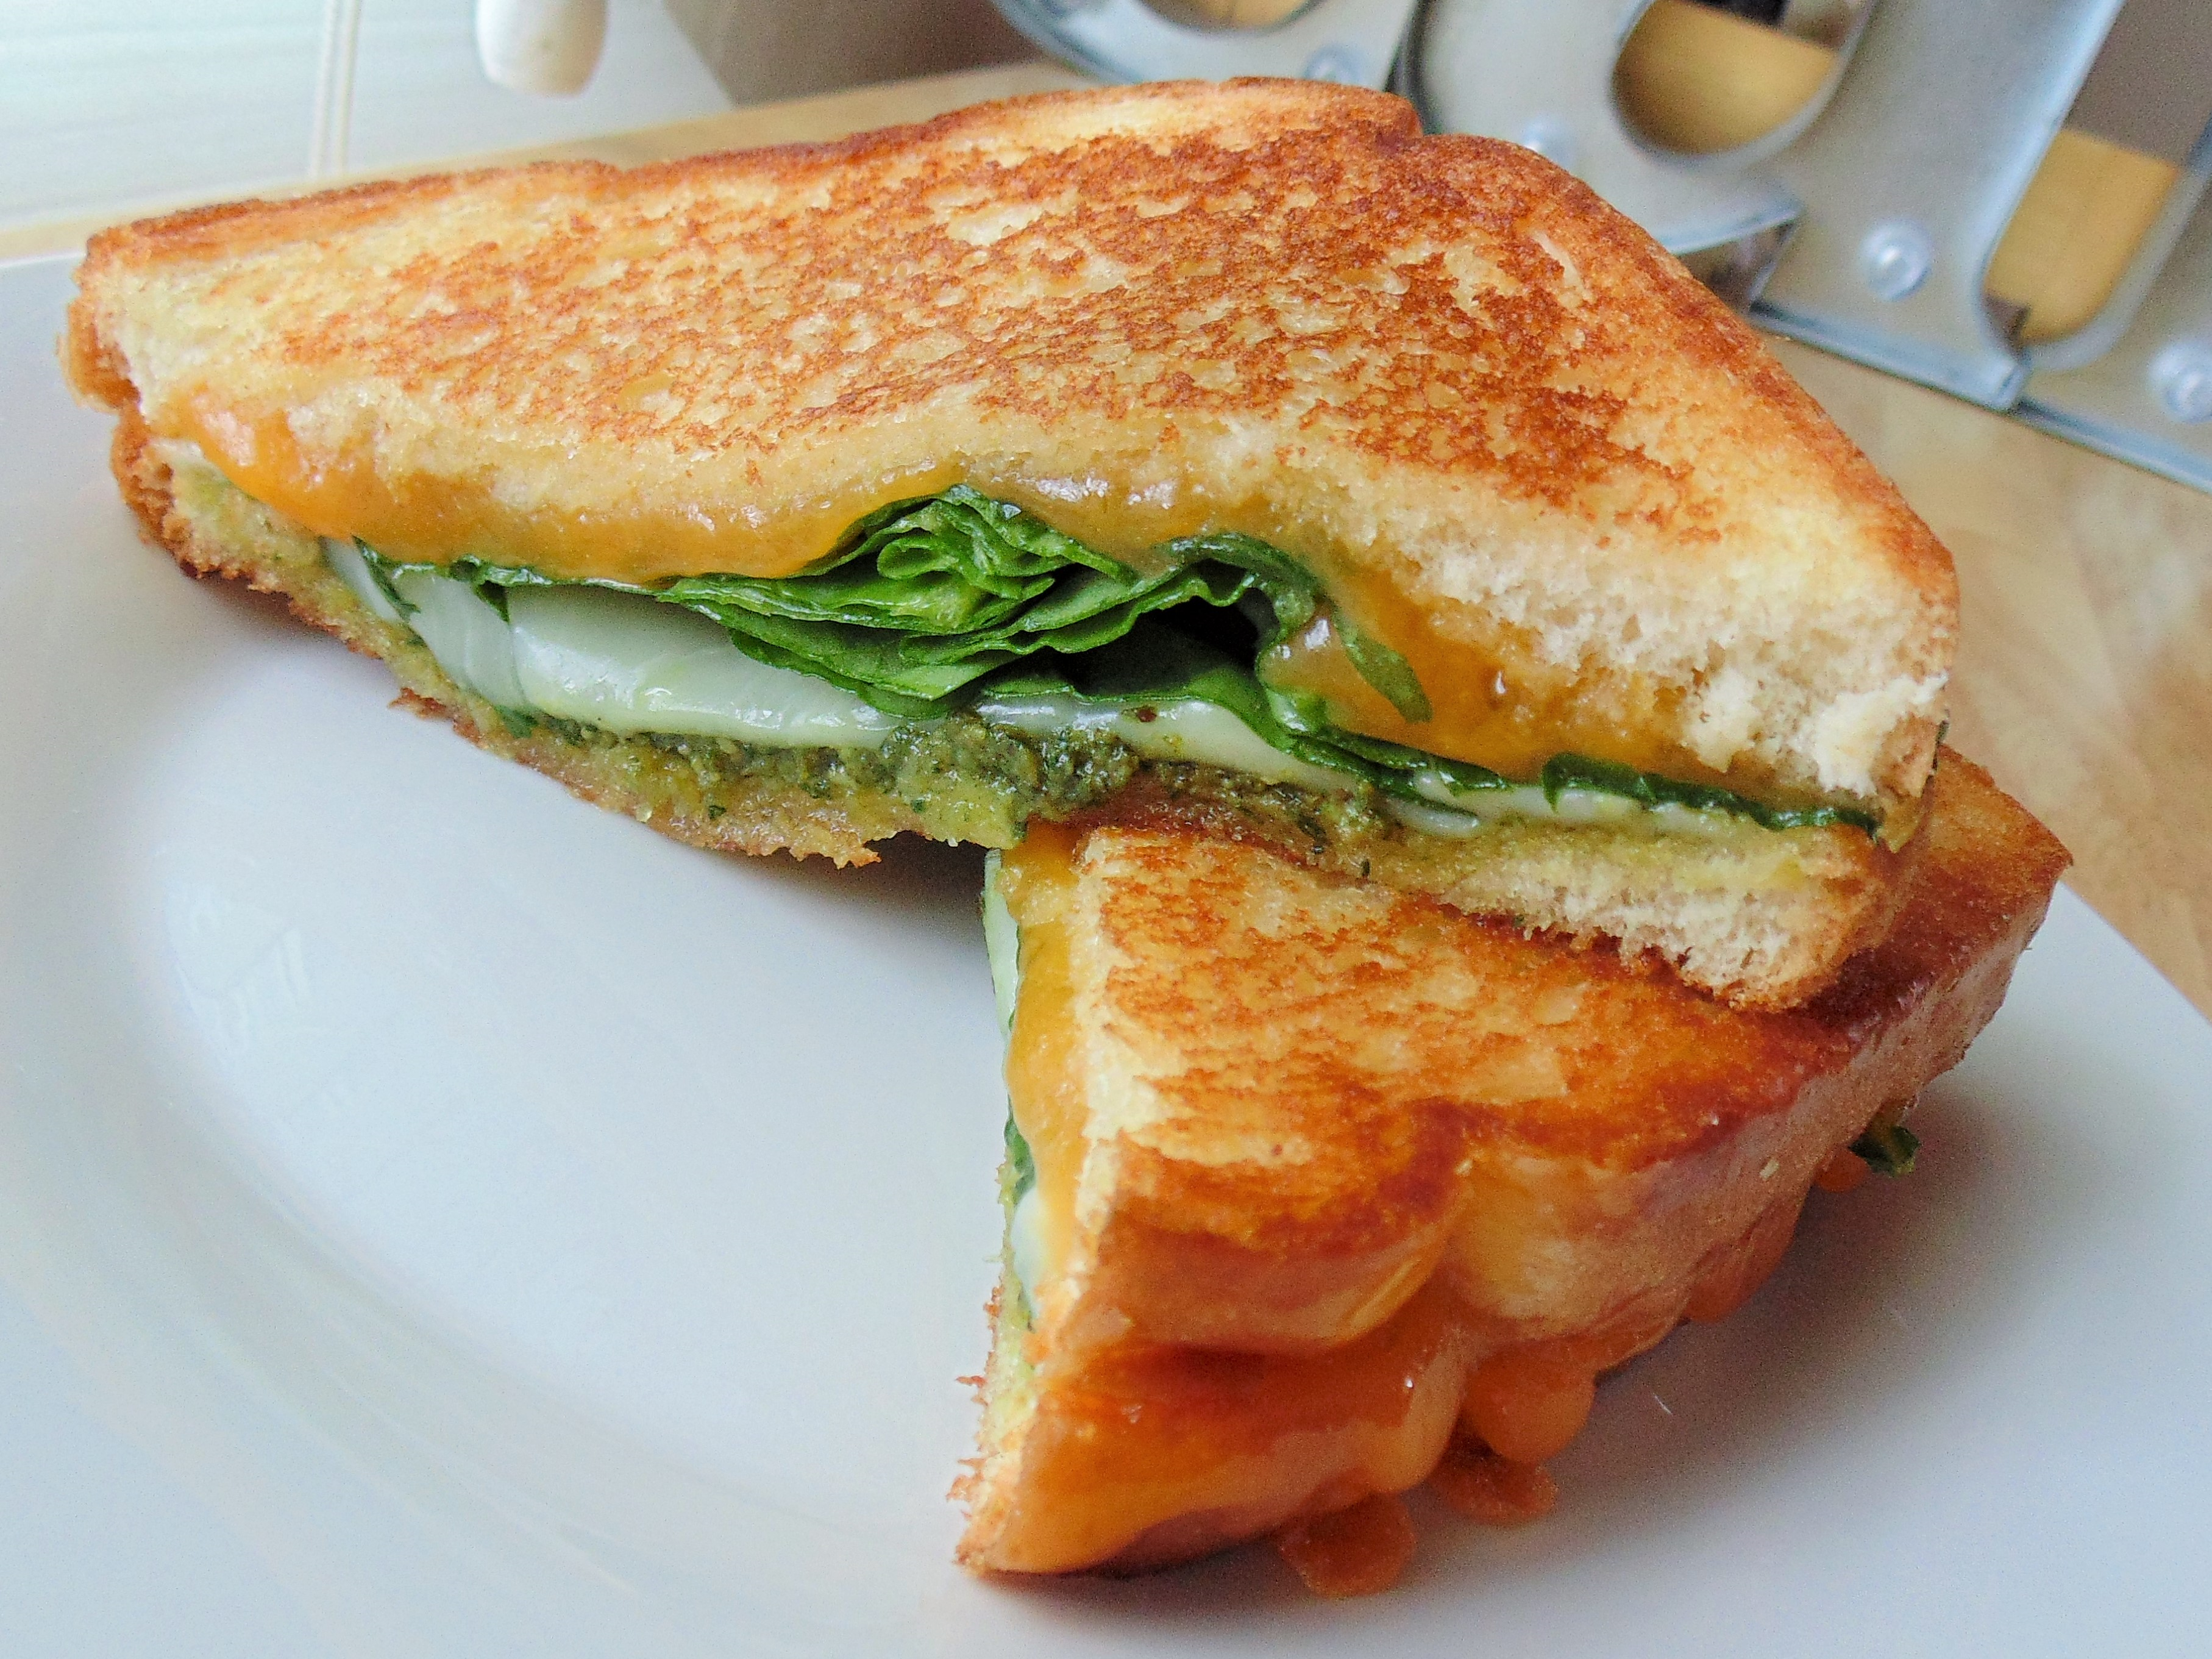 Pleasing Gourmet Grilled Pesto Cheese Sandwiches